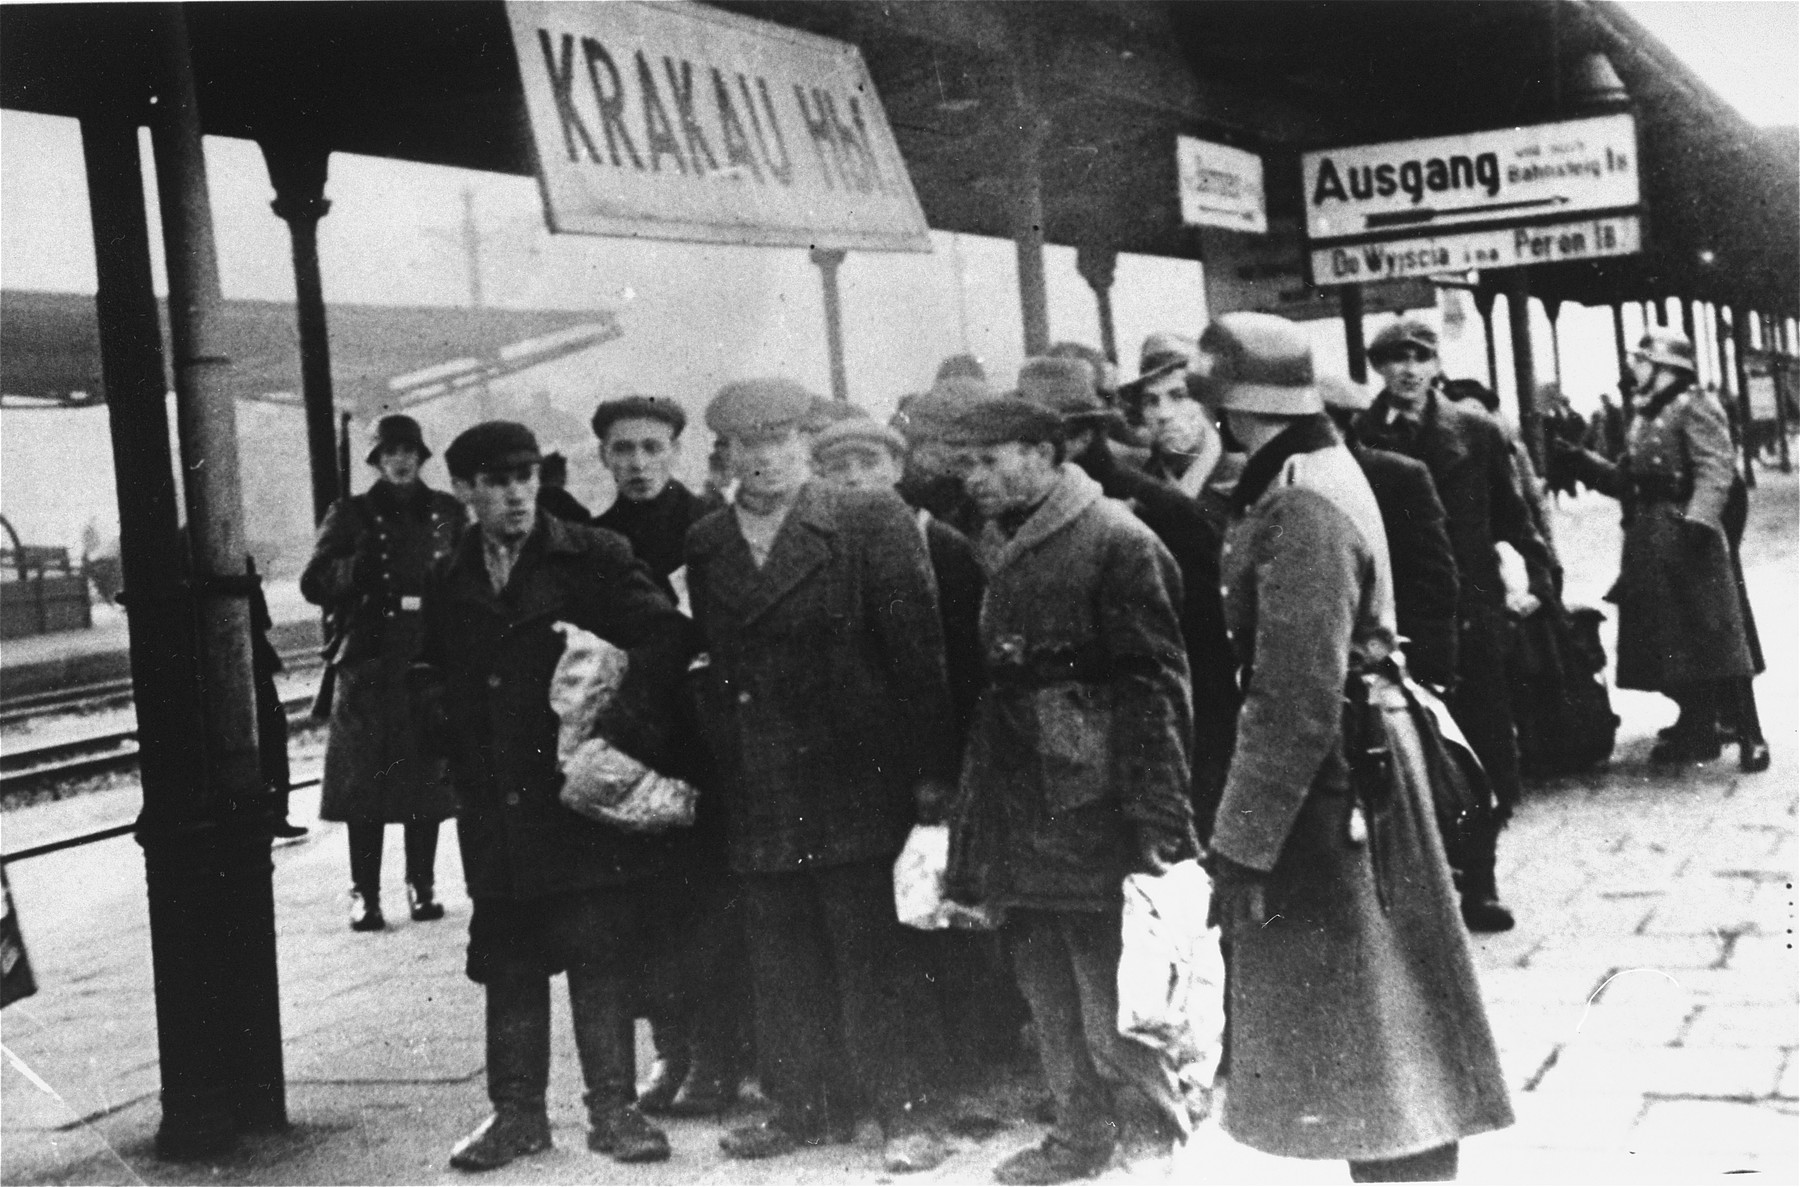 Jews assembled for deportation wait on the platform in the railway station for further transport.